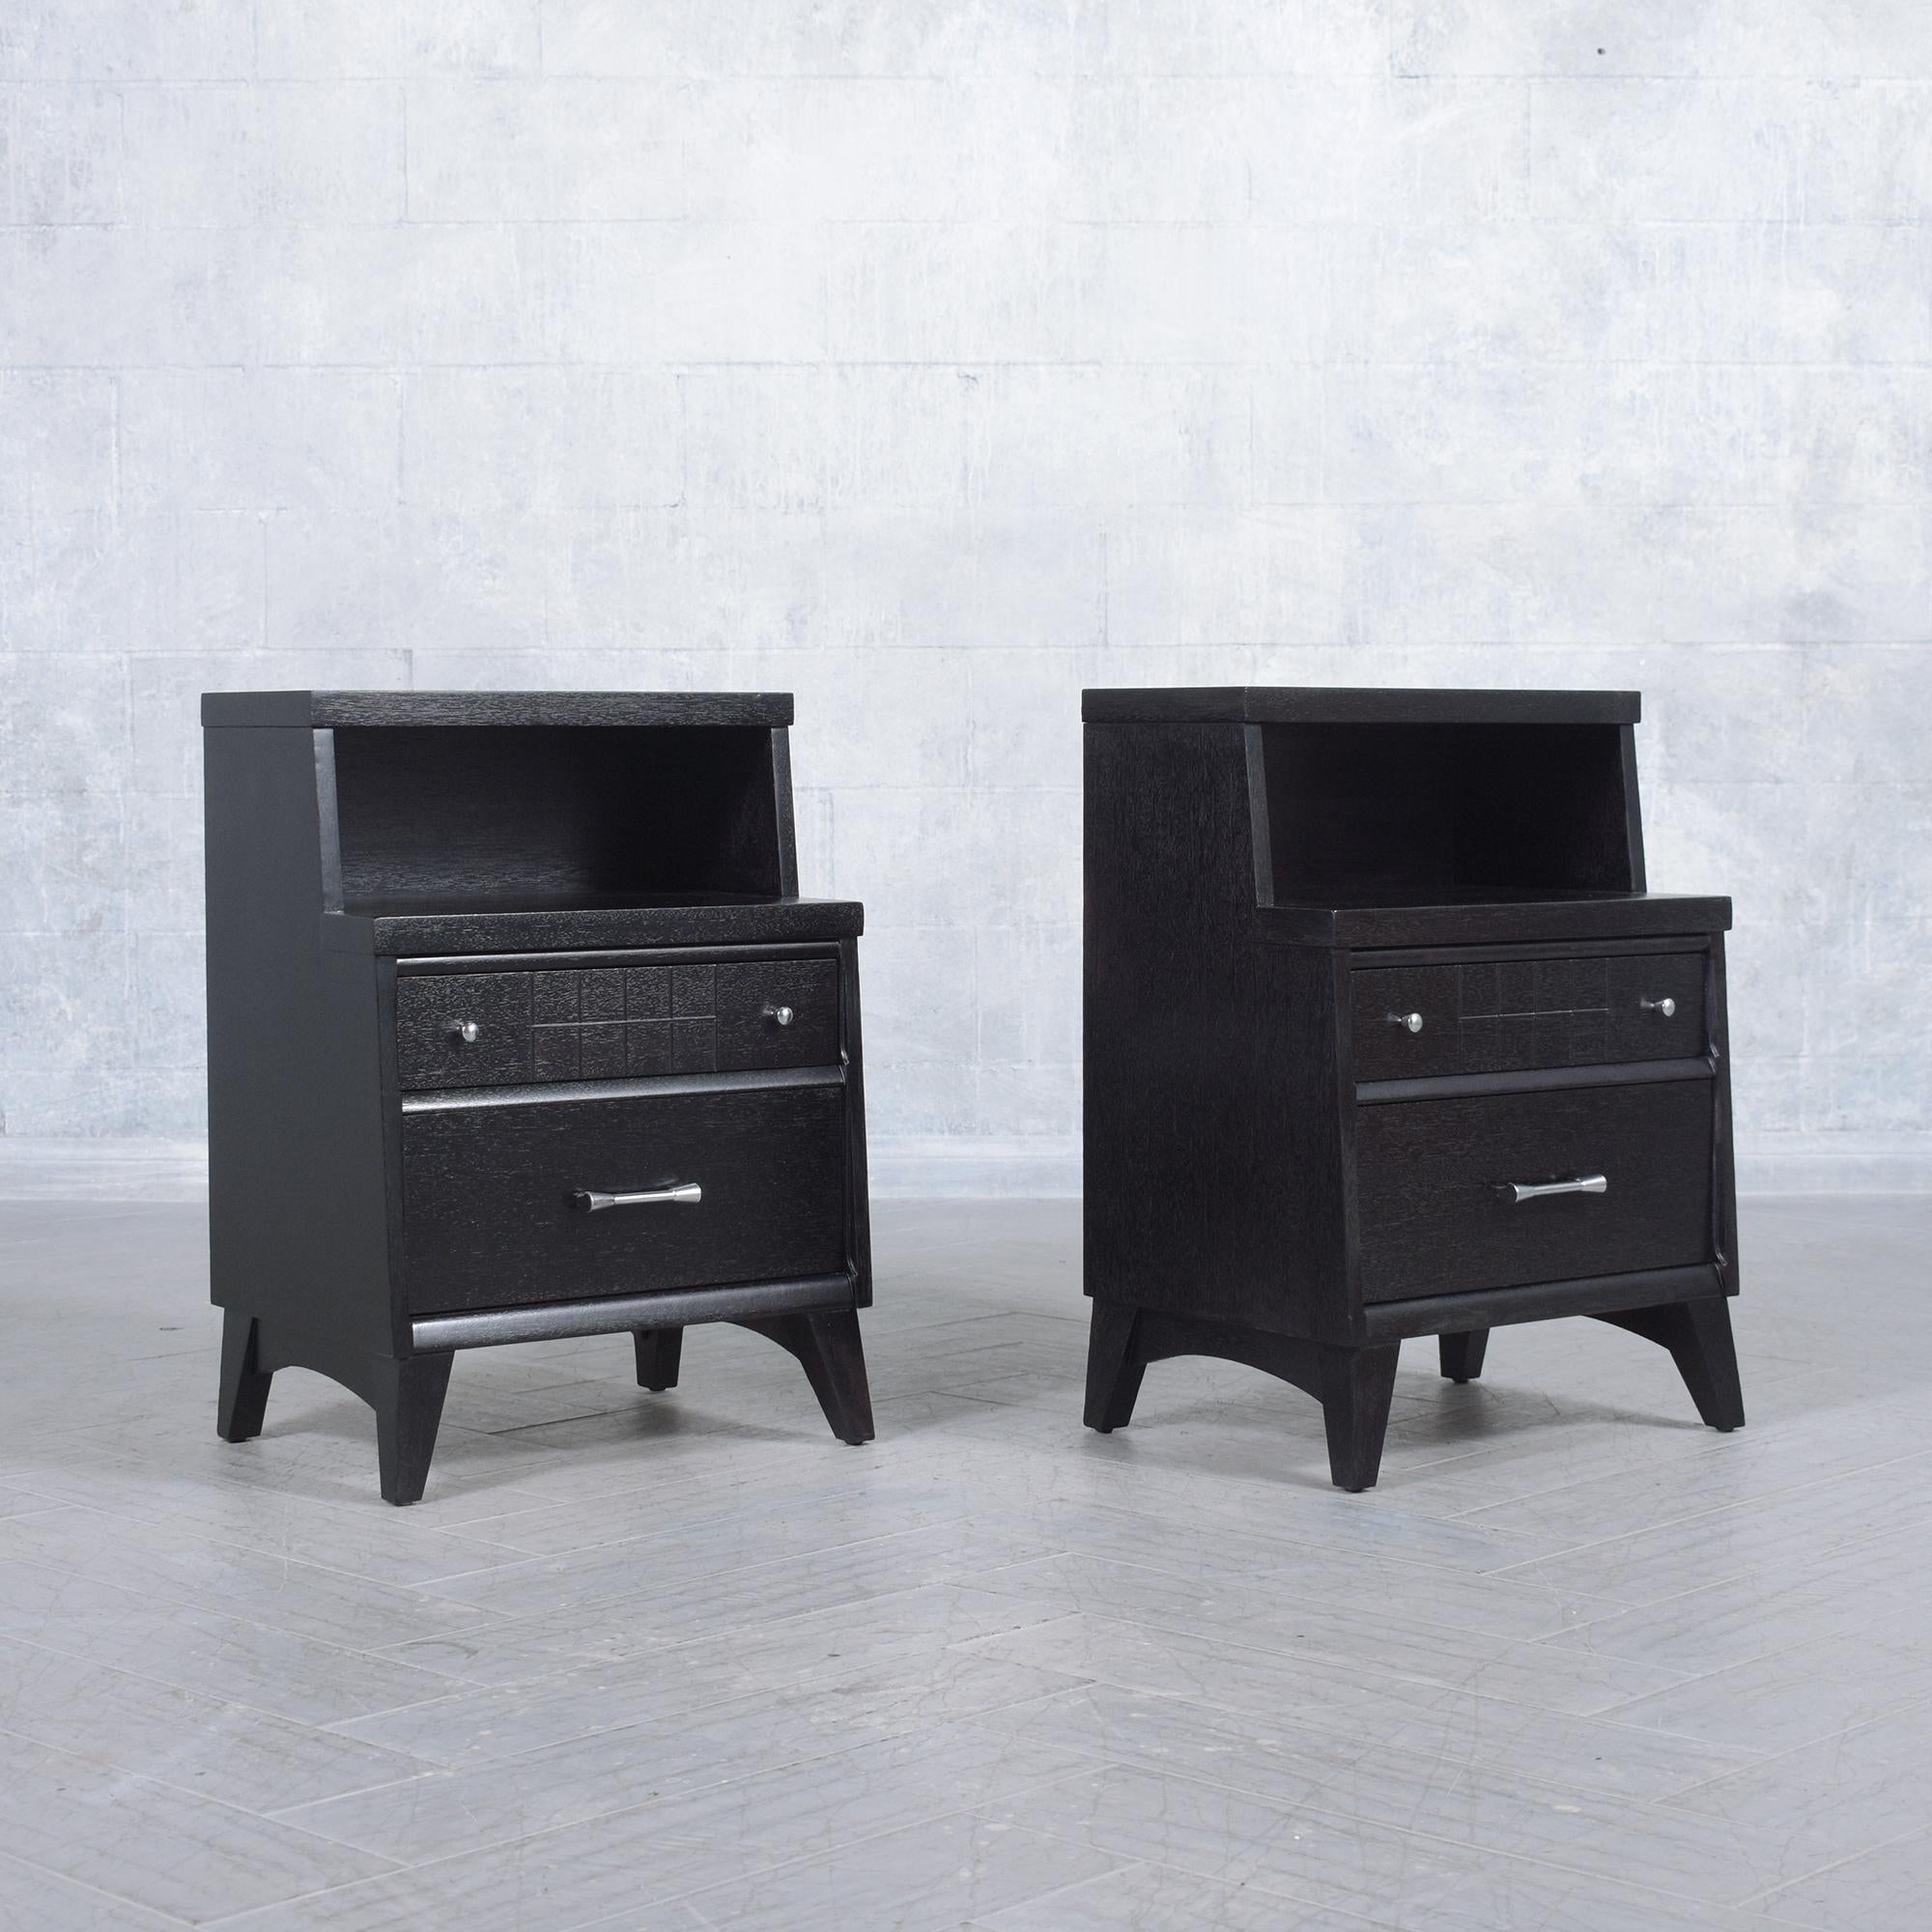 Vintage Mid-Century Modern Nightstands with Ebonized Finish and Chrome Hardware For Sale 3